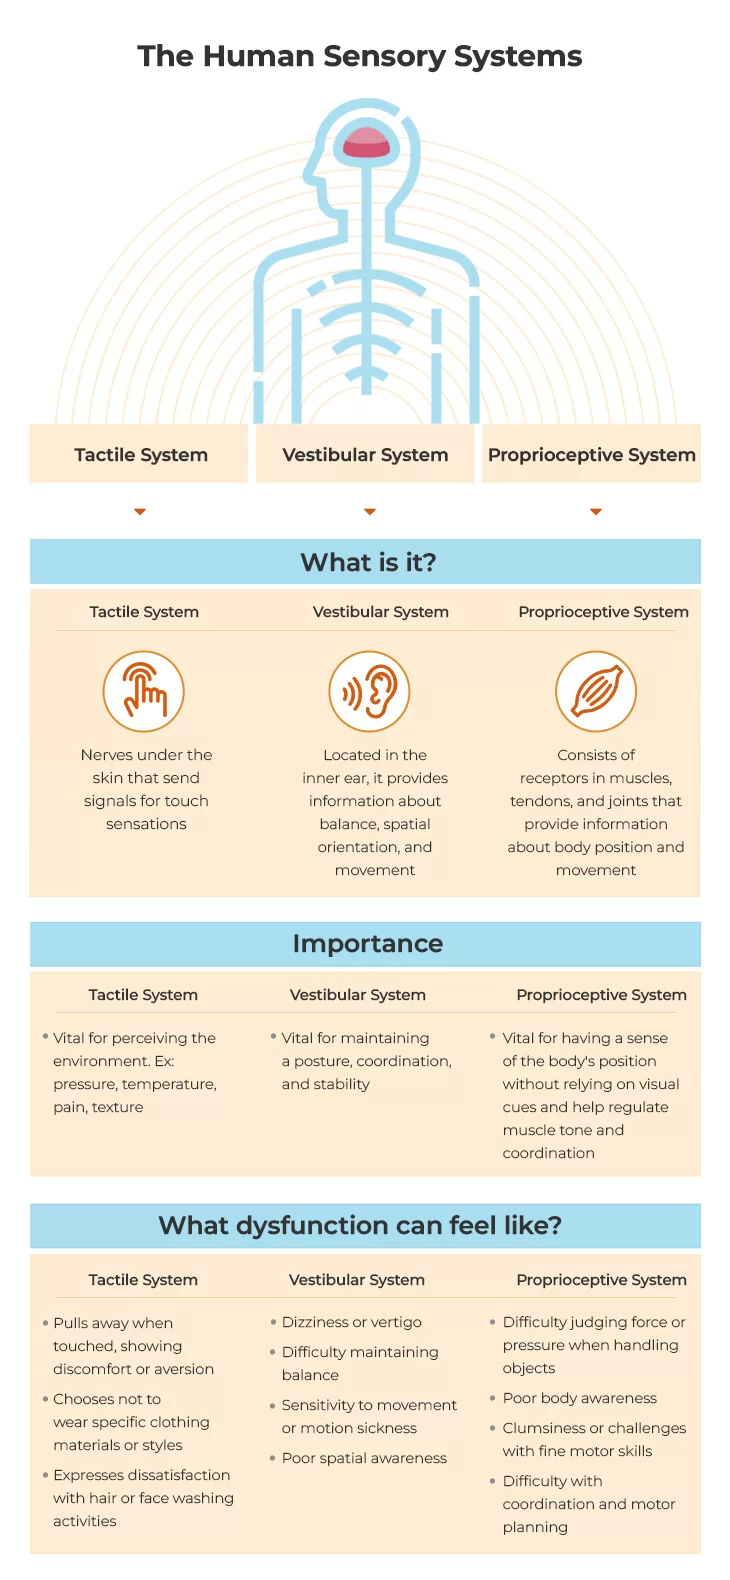 This image depicts a infographic representation of human sensory systems